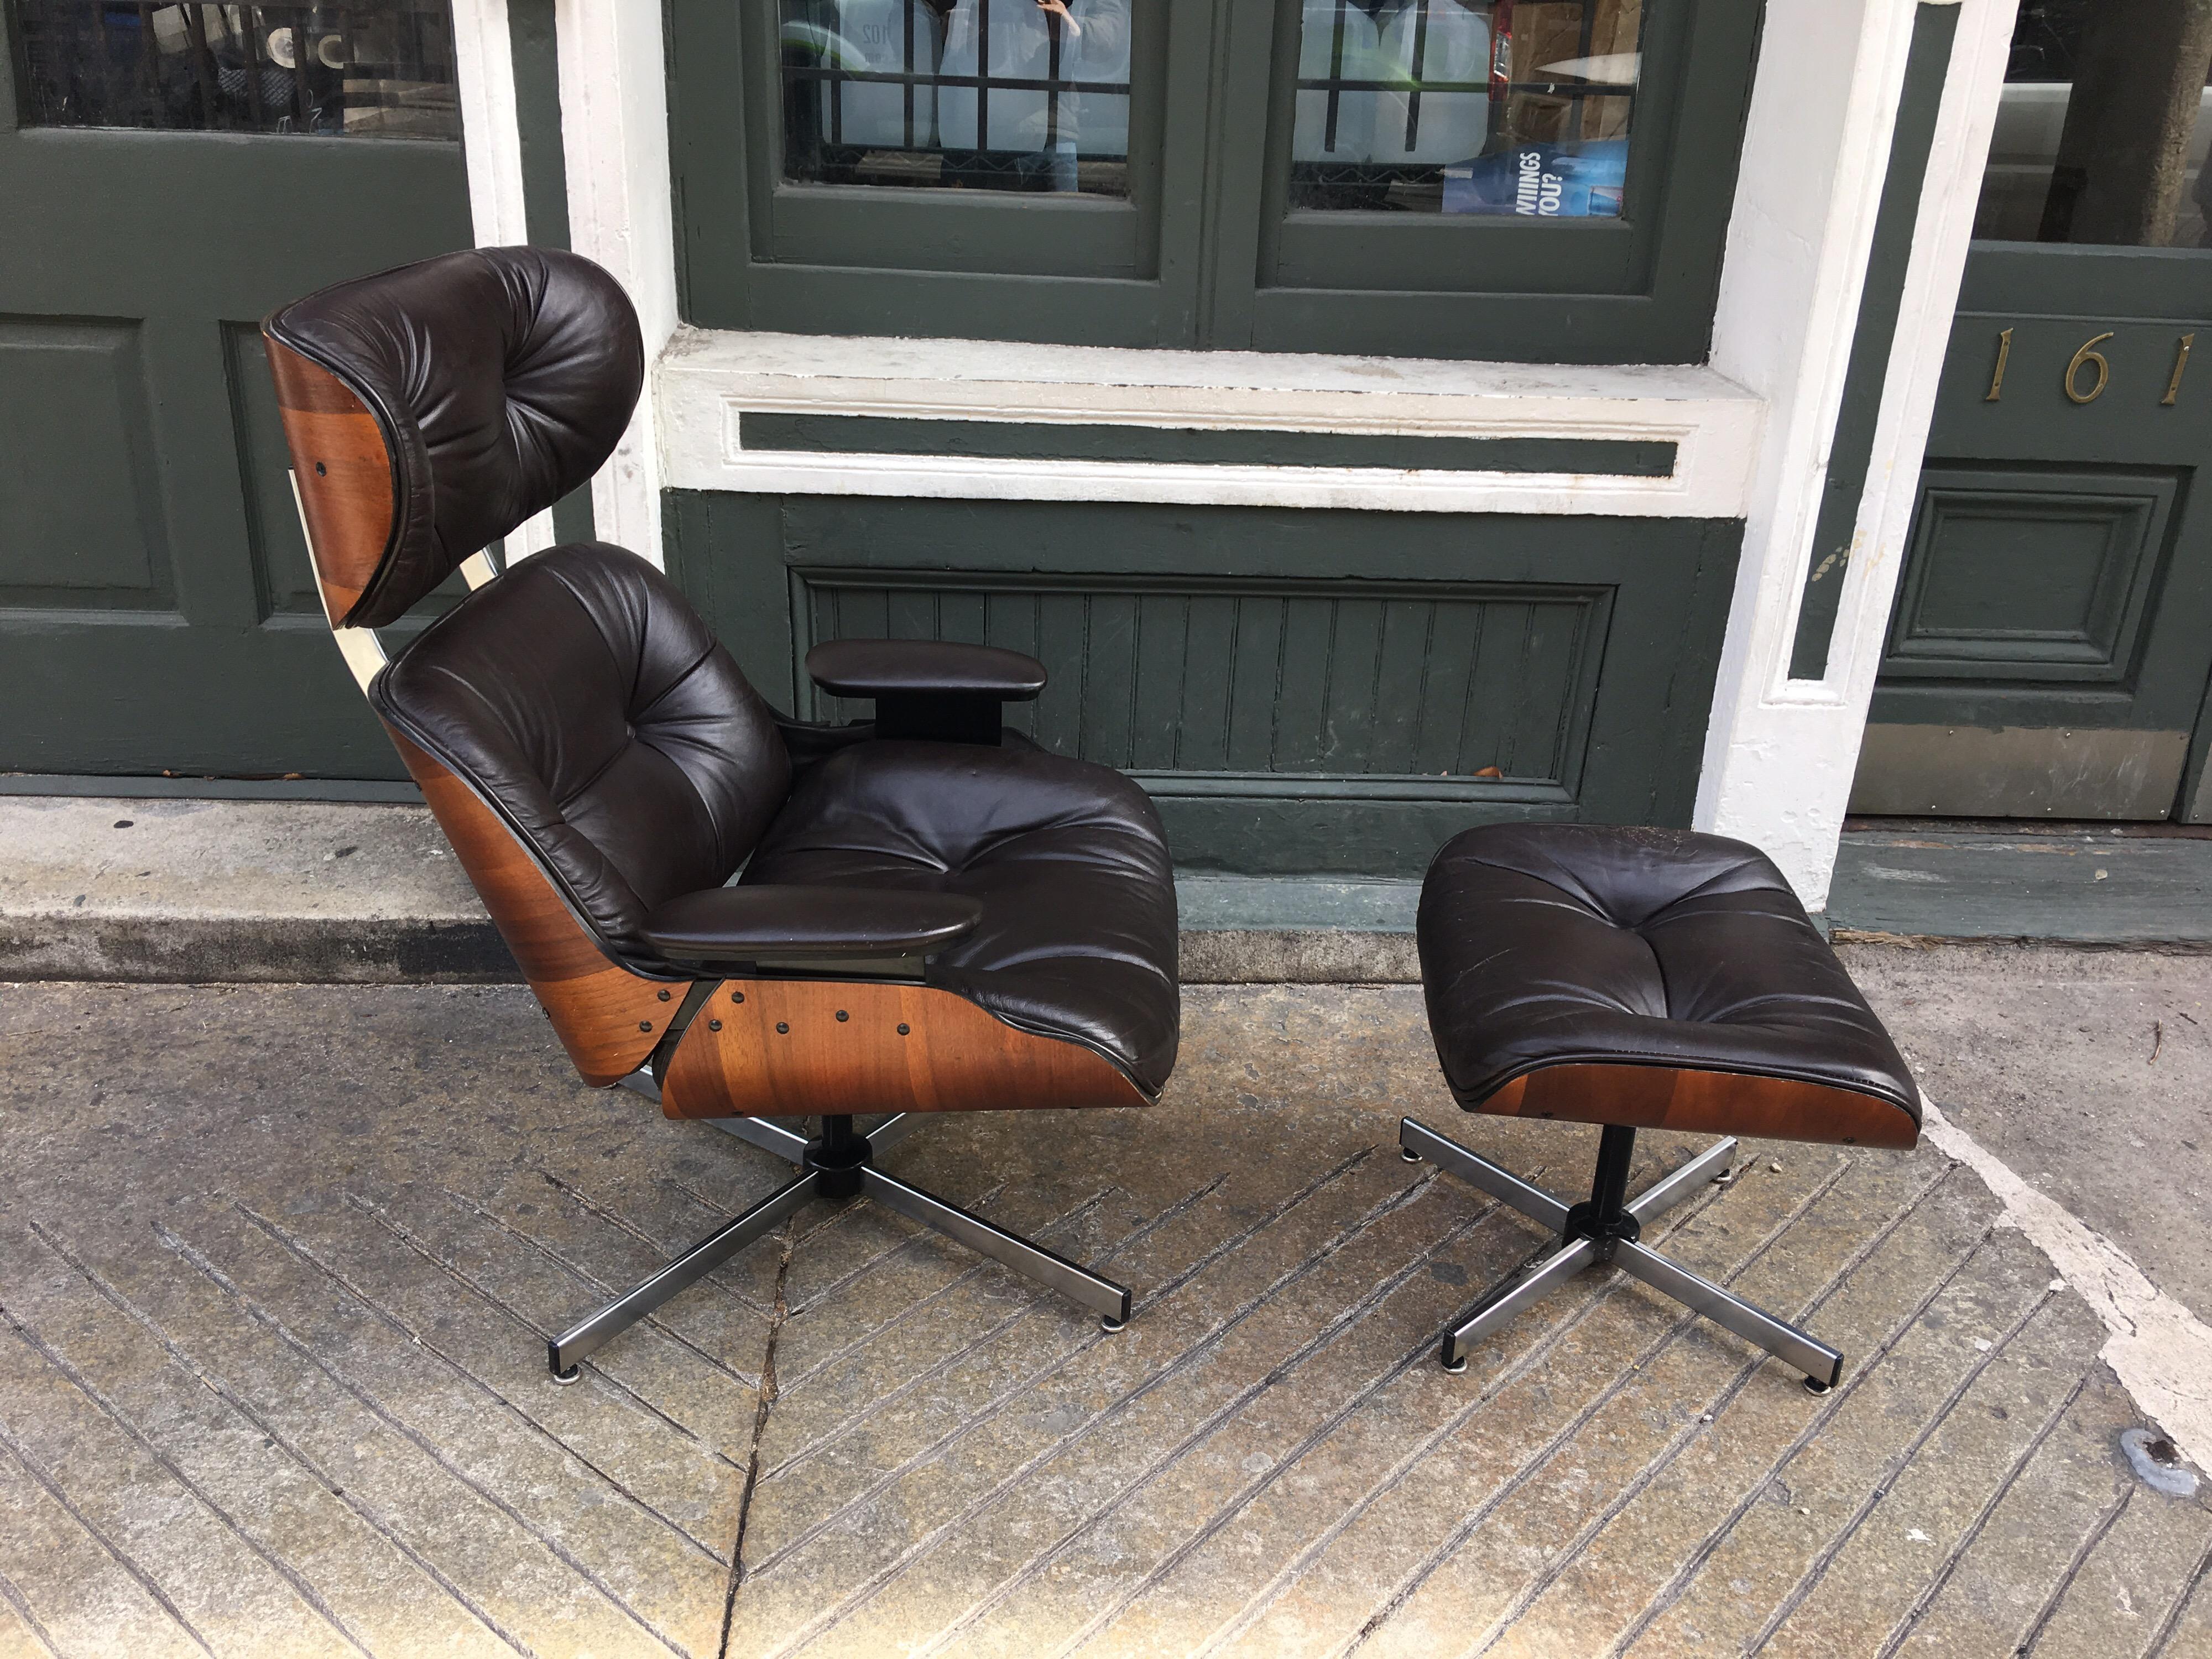 Plycraft Selig lounge chair and ottoman in walnut with chocolate brown vinyl interior cushions. Higher back than the Eames design makes this a very comfortable alternative design choice from the Herman Miller model.